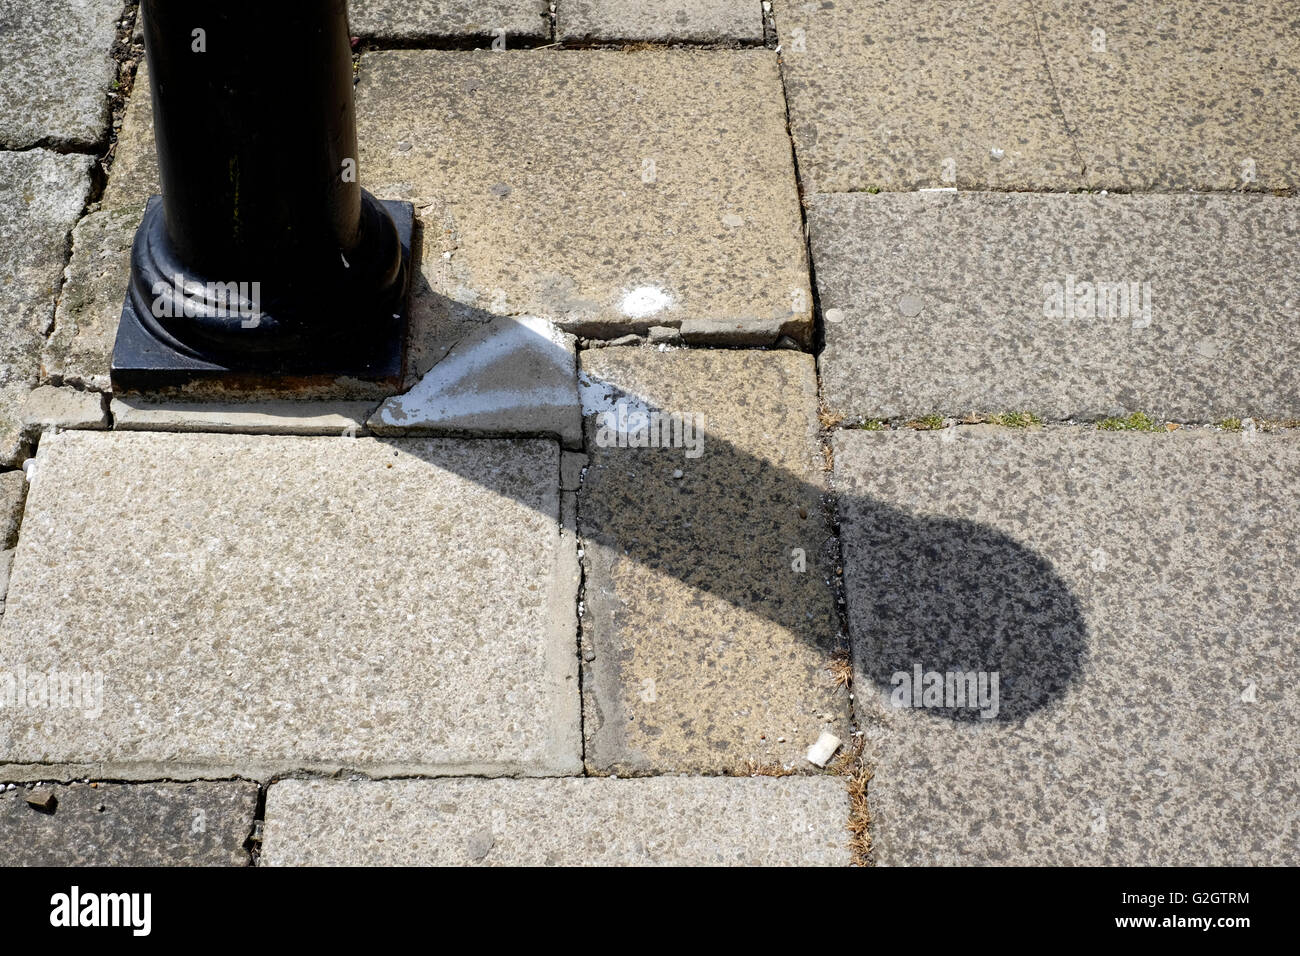 uneven paving slabs on pavement presenting hazard for pedestrians england uk Stock Photo